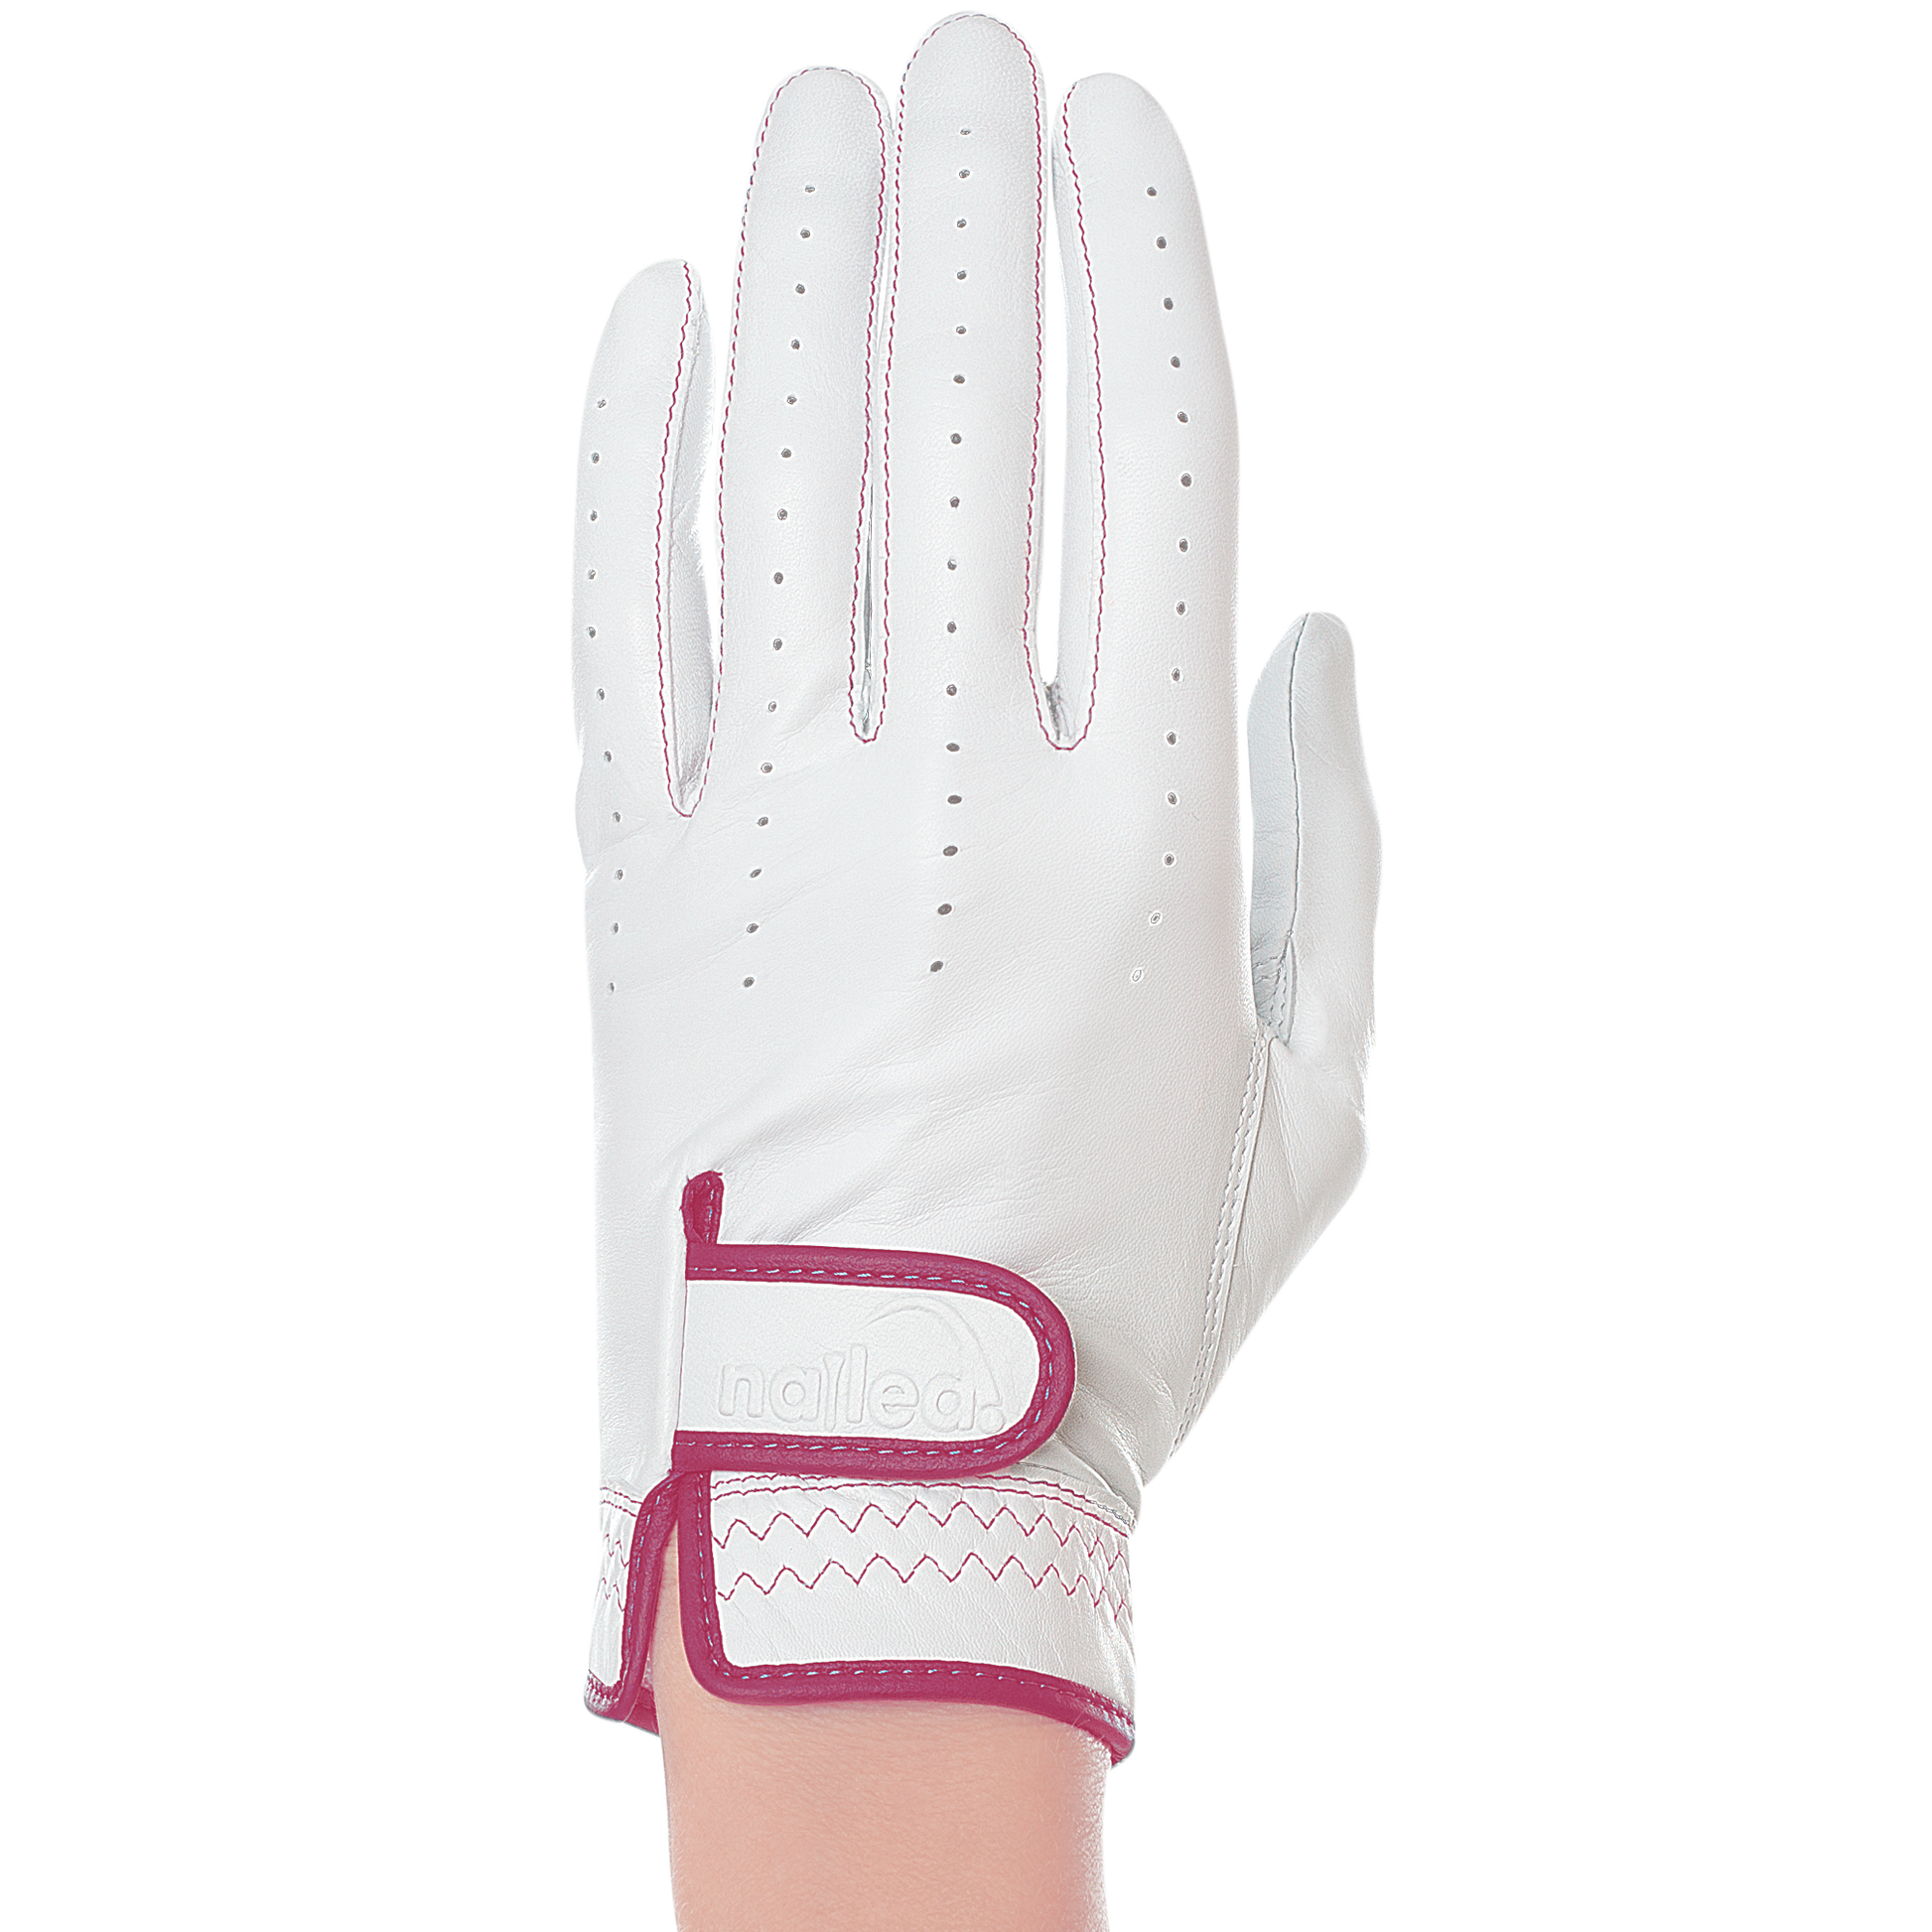 Nailed Golf Luxury Fuchsia Golf Glove - Gals on and off the Green